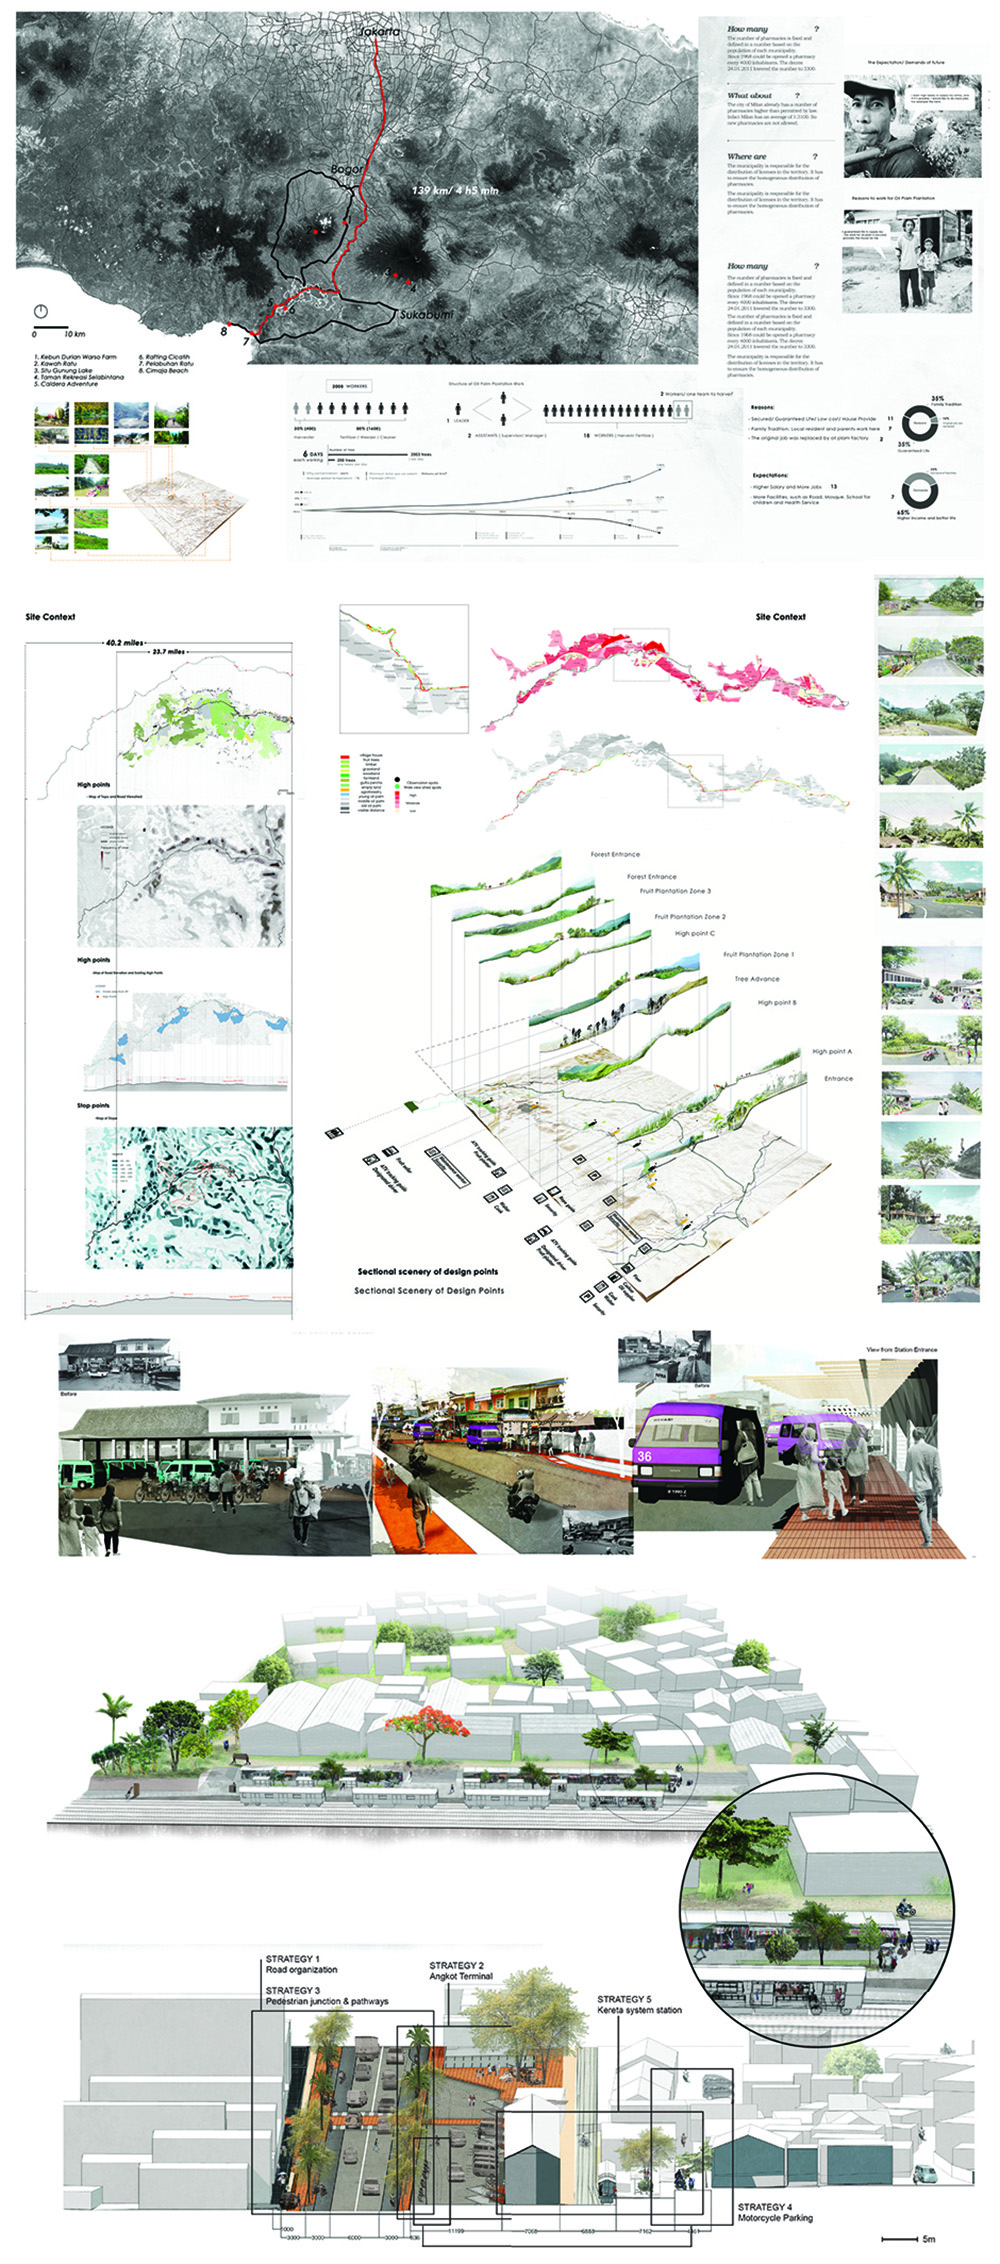 LANDSCAPE OF NECESSITY - LANDSCAPE ARCHITECTURAL APPROACHES FOR AN URBANIZING AGRICULTURAL REGION